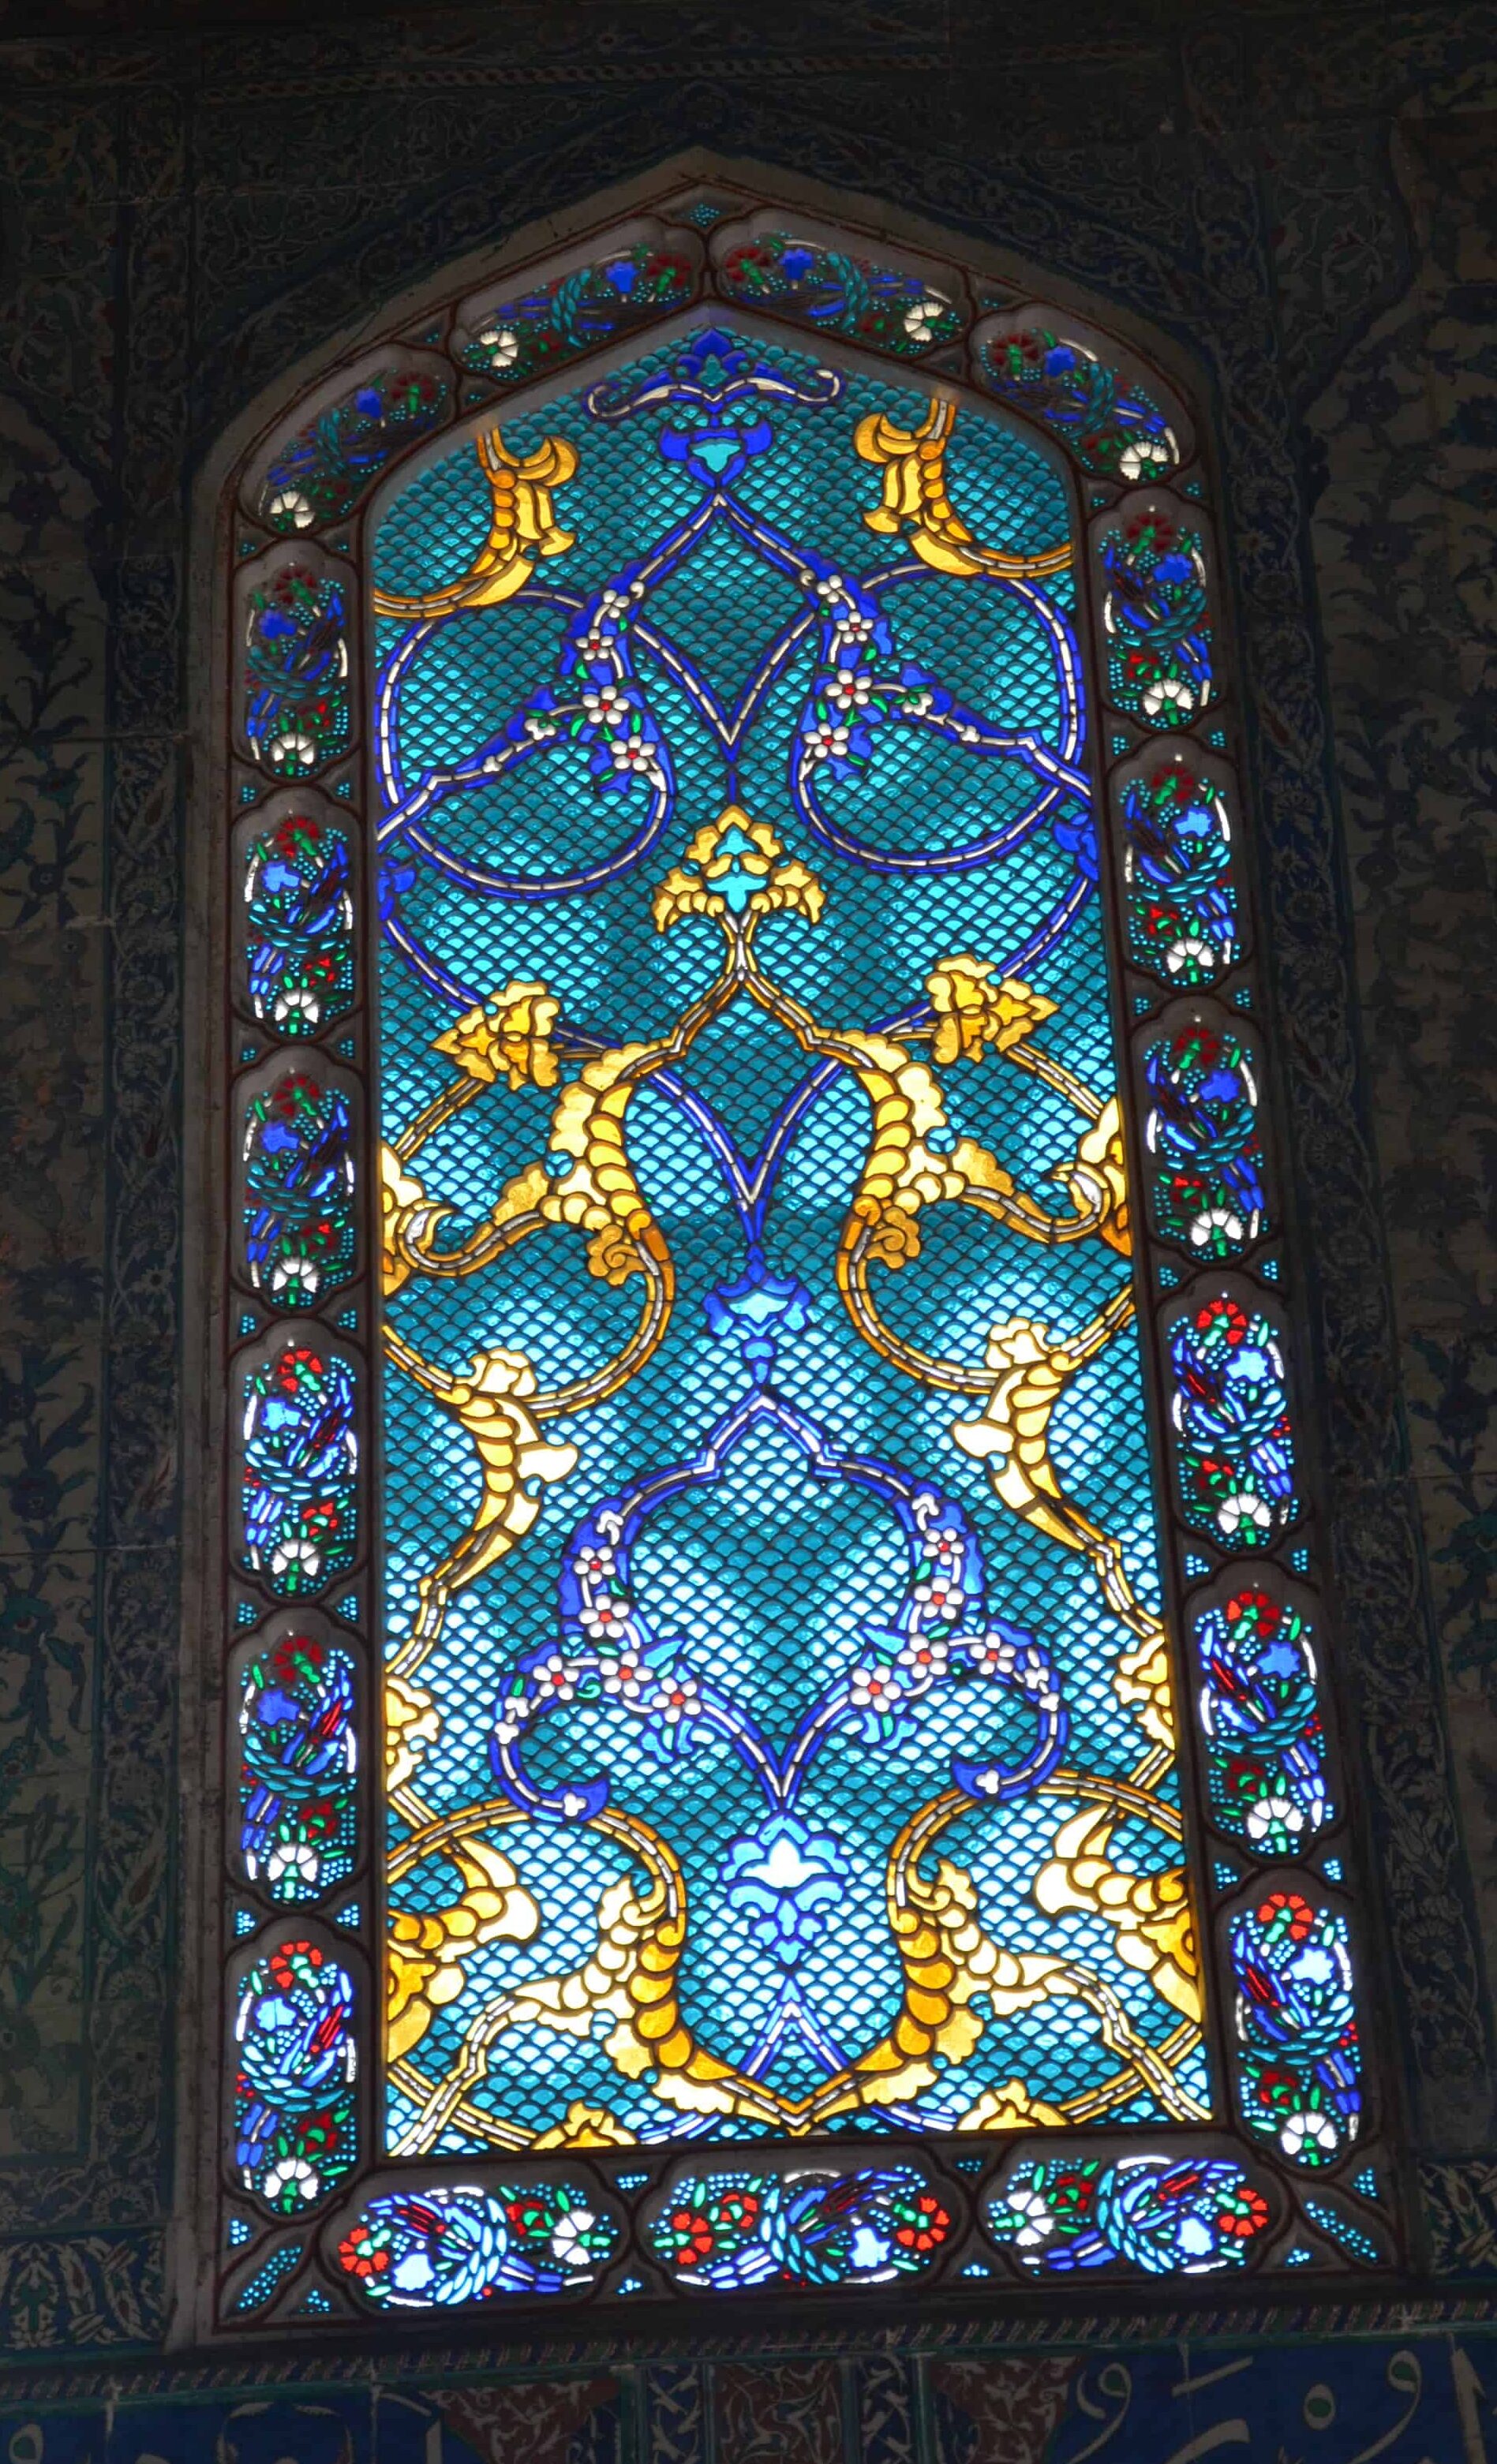 Stained glass window in the Twin Kiosk in the Imperial Harem at Topkapi Palace in Istanbul, Turkey